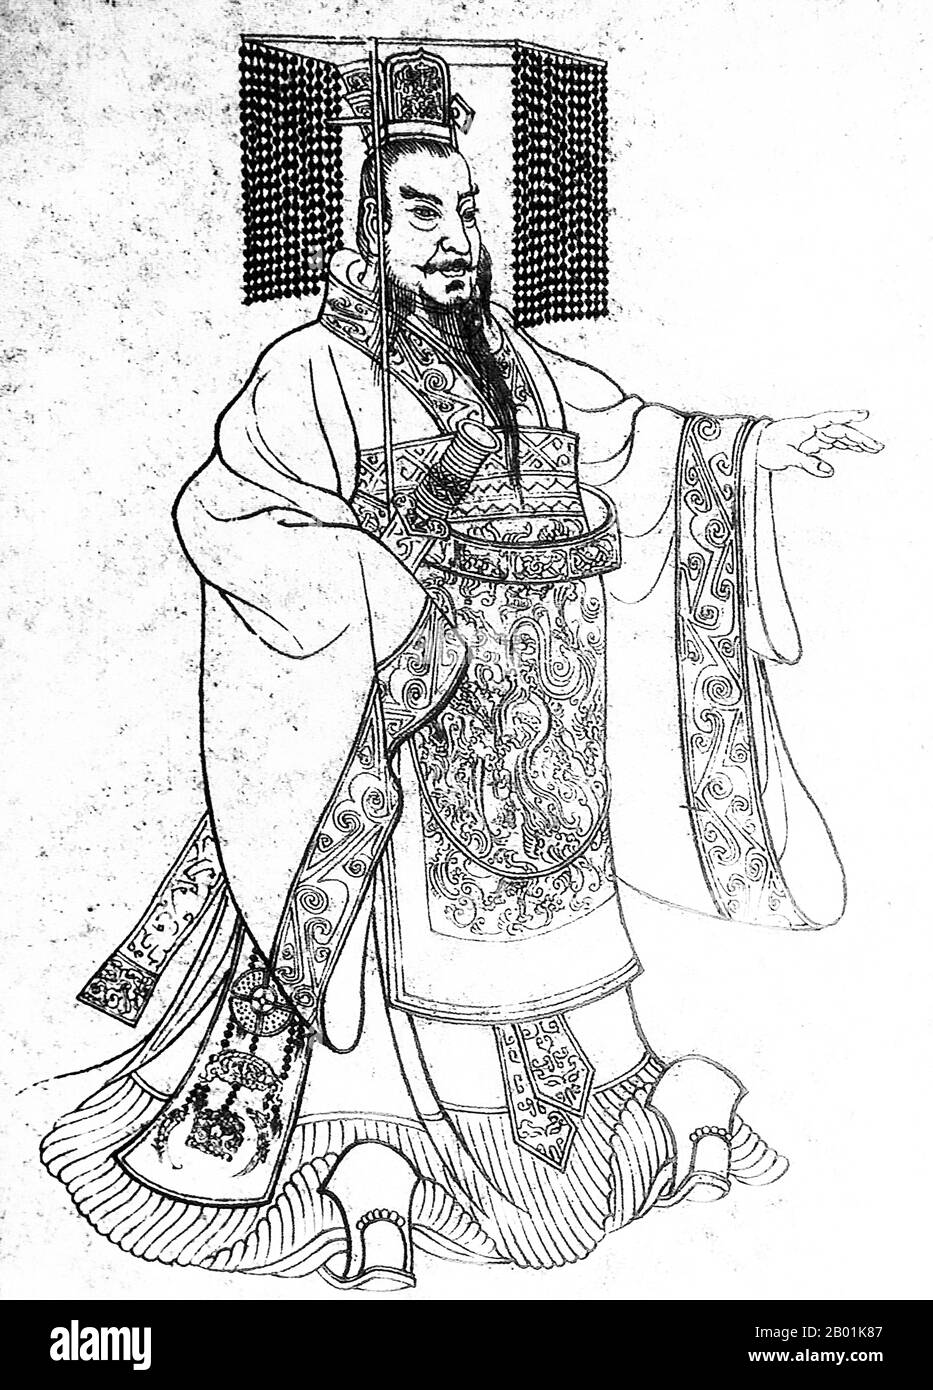 China: Qin Shu Huang/Qin Shi Huangdi (259-210 BCE), First Emperor of a unified China. Ink drawing, c. 18th century.  Qin Shi Huang, personal name Ying Zheng, was king of the Chinese State of Qin from 246 to 221 BCE during the Warring States Period. He became the first emperor of a unified China in 221 BCE, and ruled until his death in 210 BC at the age of 49. Styling himself 'First Emperor' after China's unification, Qin Shi Huang is a pivotal figure in Chinese history, ushering in nearly two millennia of imperial rule. Stock Photo